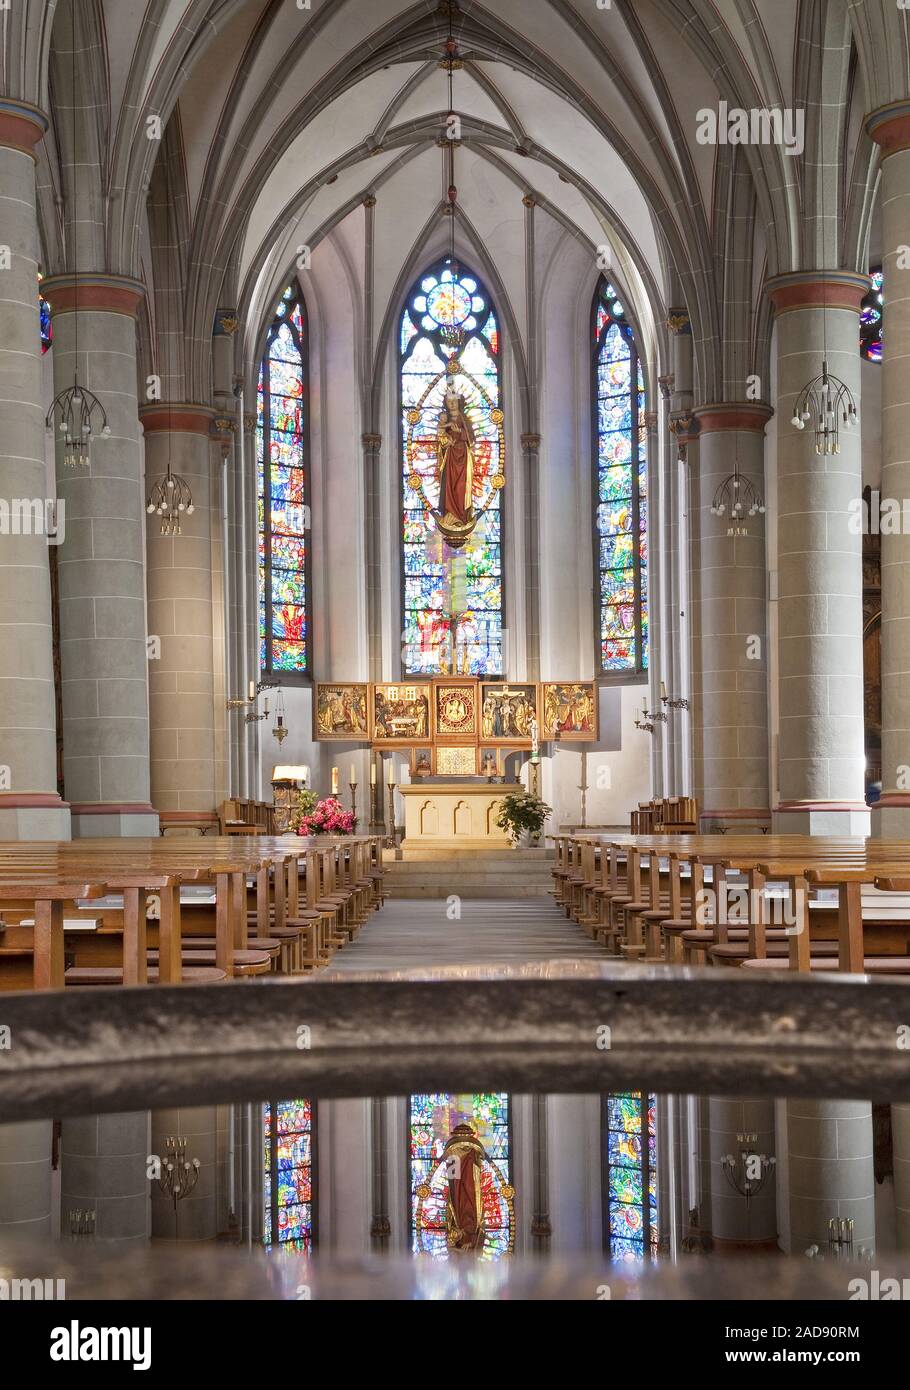 St. Peter and Paul church, inside view, Bochum, Ruhr Area, North Rhine-Westphalia, Germany, Europe Stock Photo